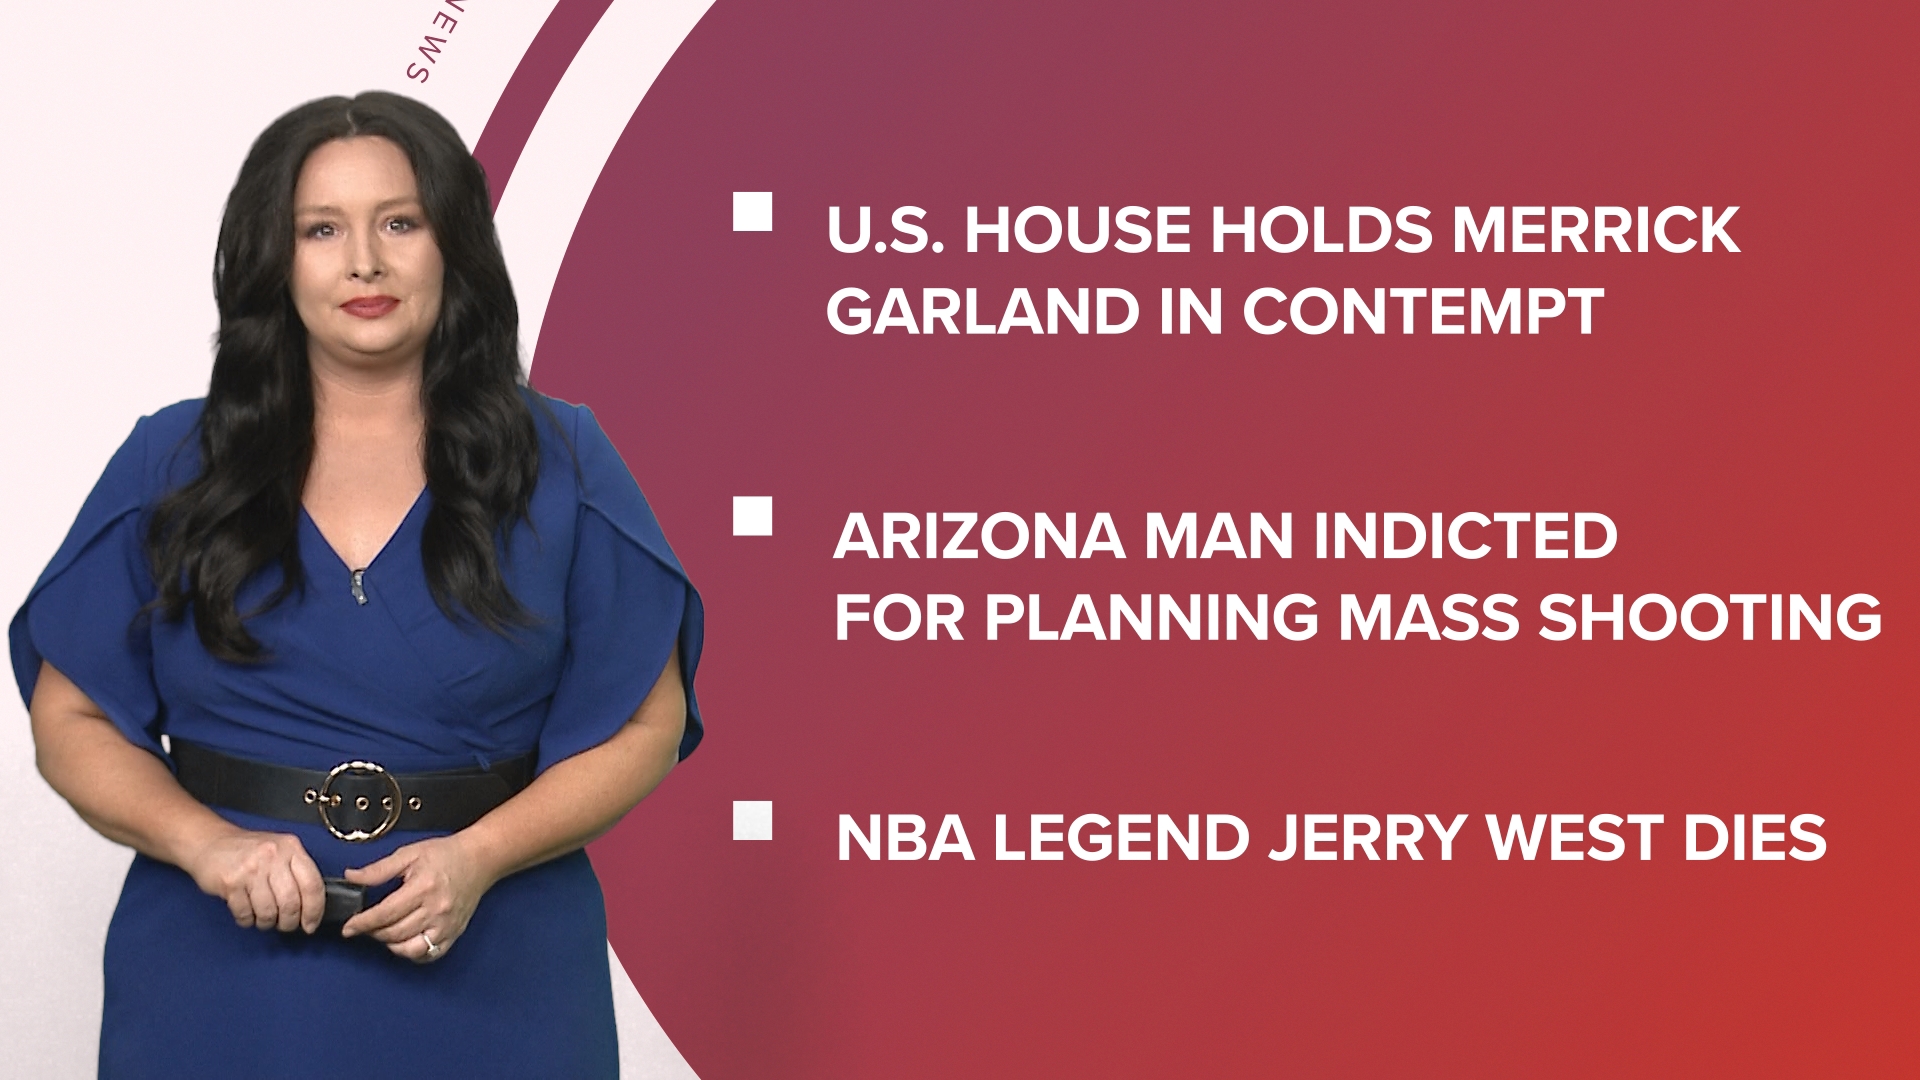 A look at what is happening in the news from U.S. House votes to hold Merrick Garland in contempt to NBA legend Jerry West dies and National Camping Month.